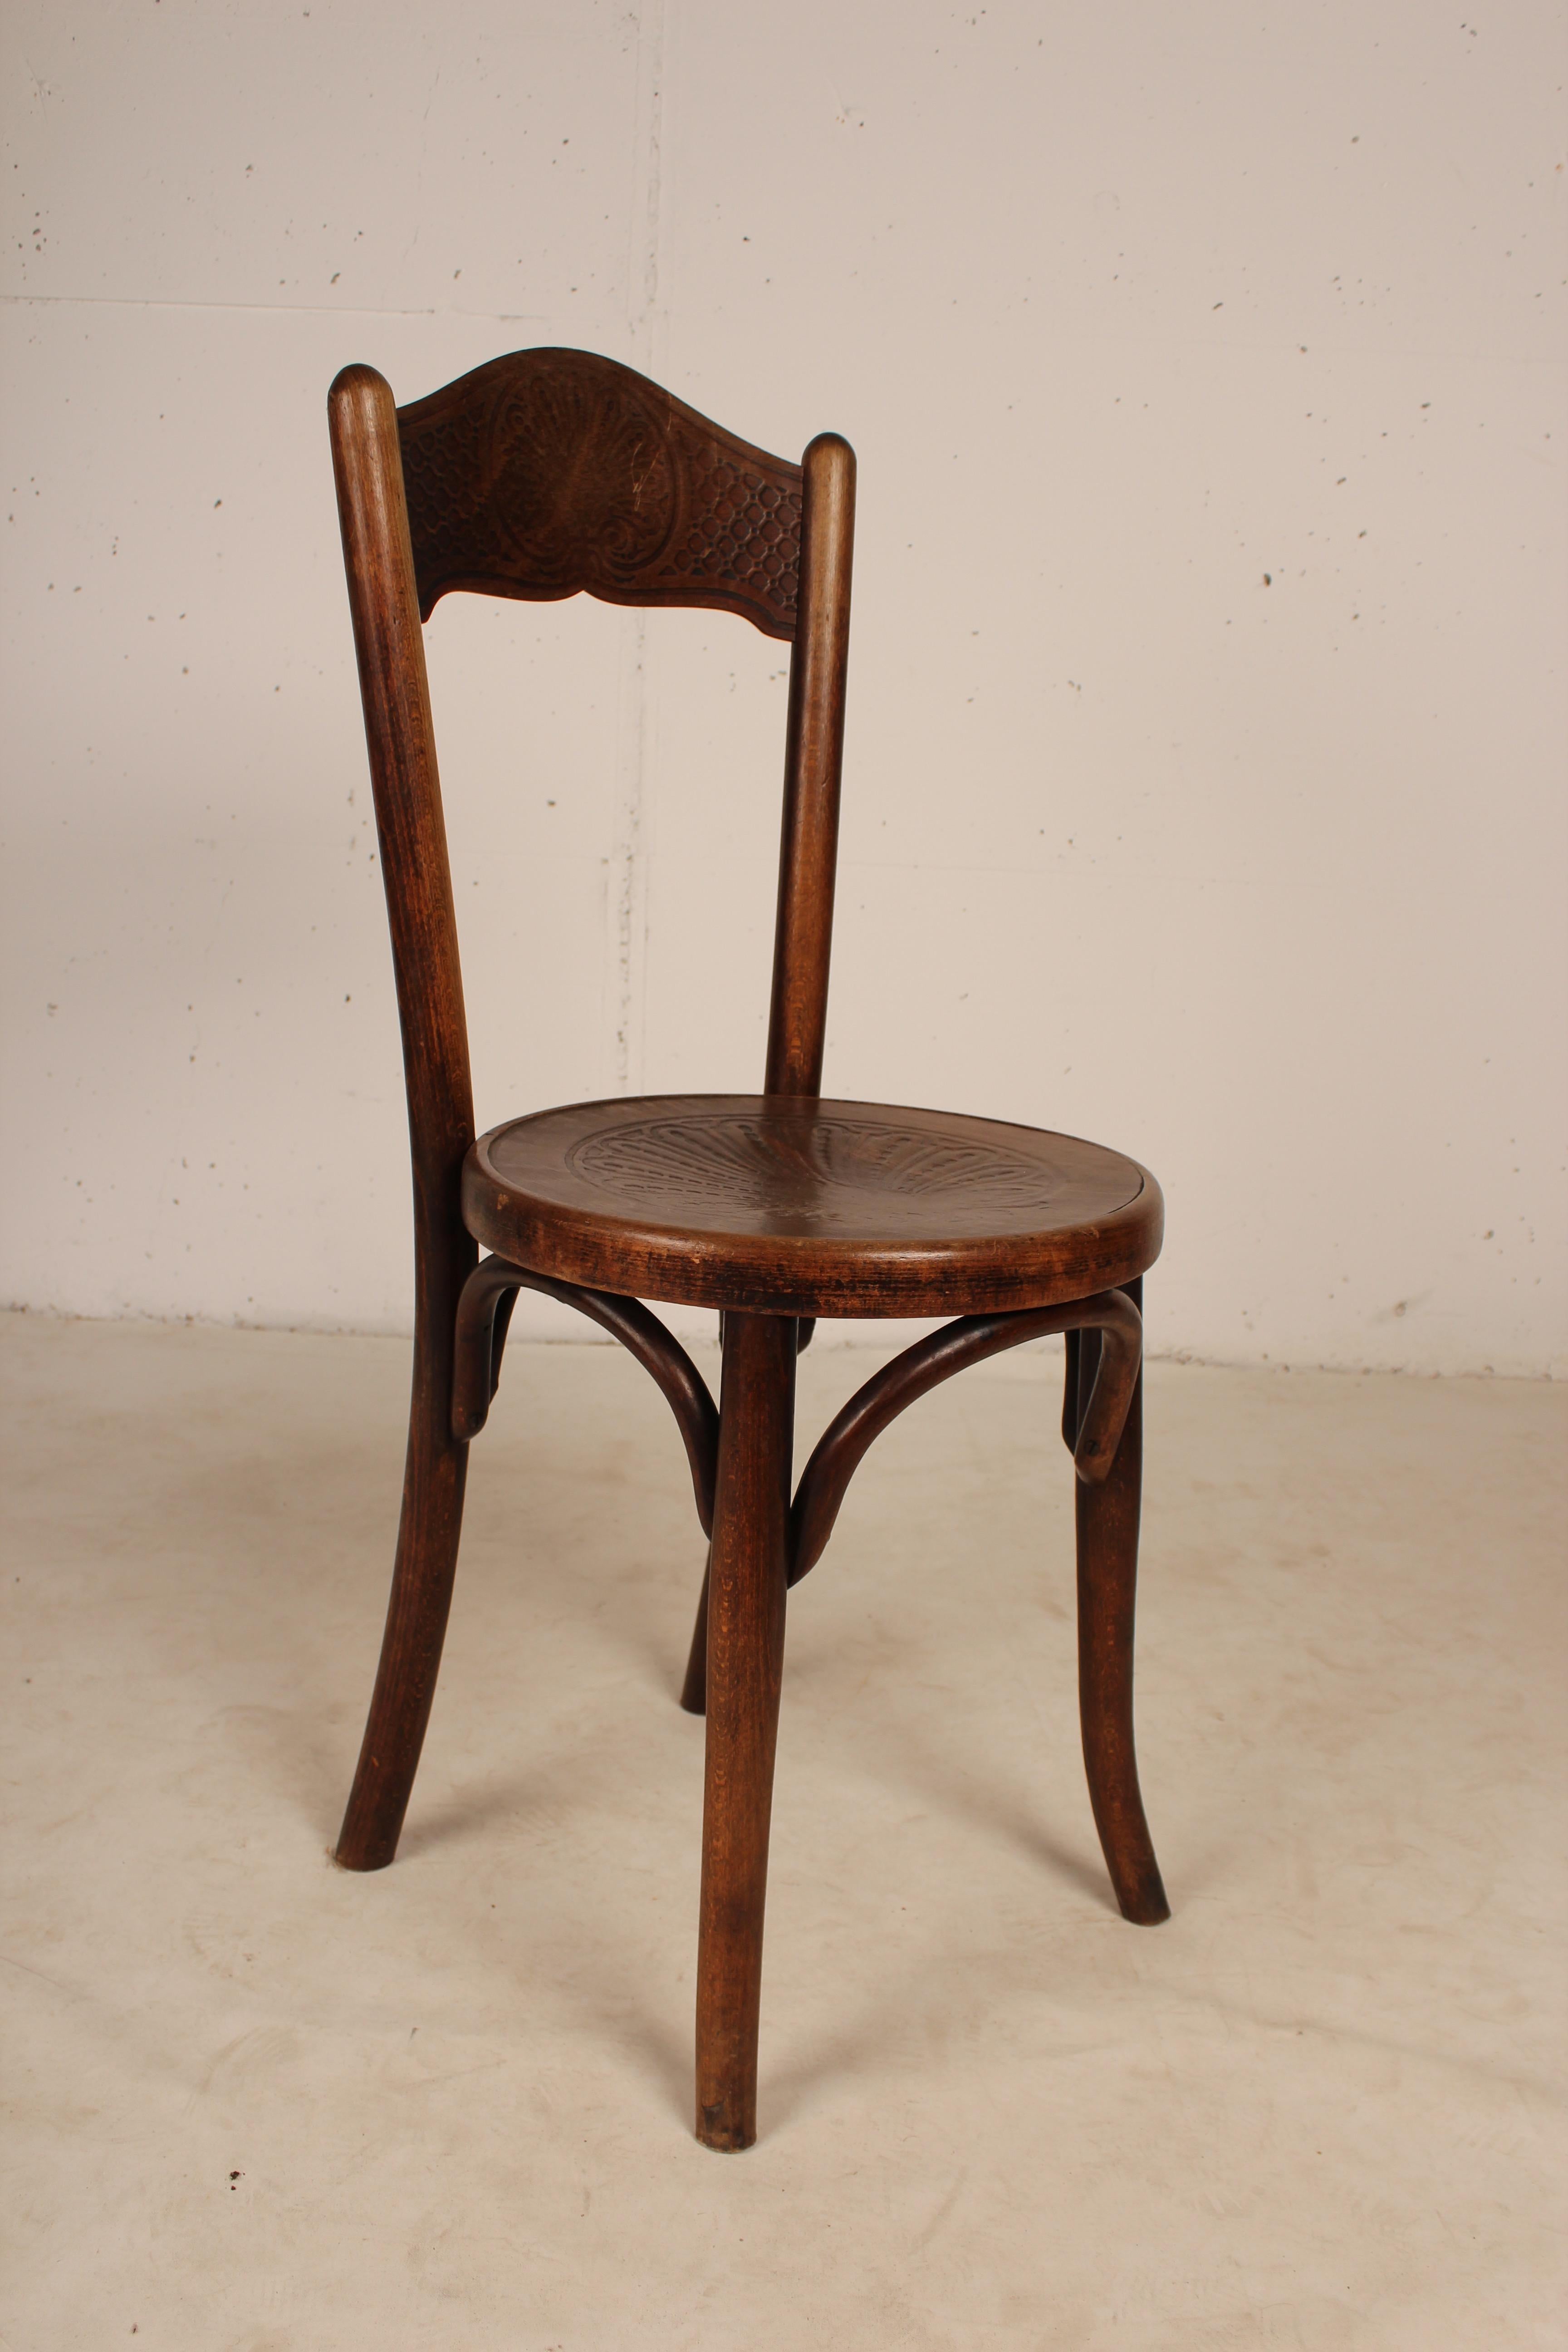 Bentwood Set of 6 Bistro Chairs by Jacob & Josef Kohn, 1890 Austro-Hungarian Empire For Sale